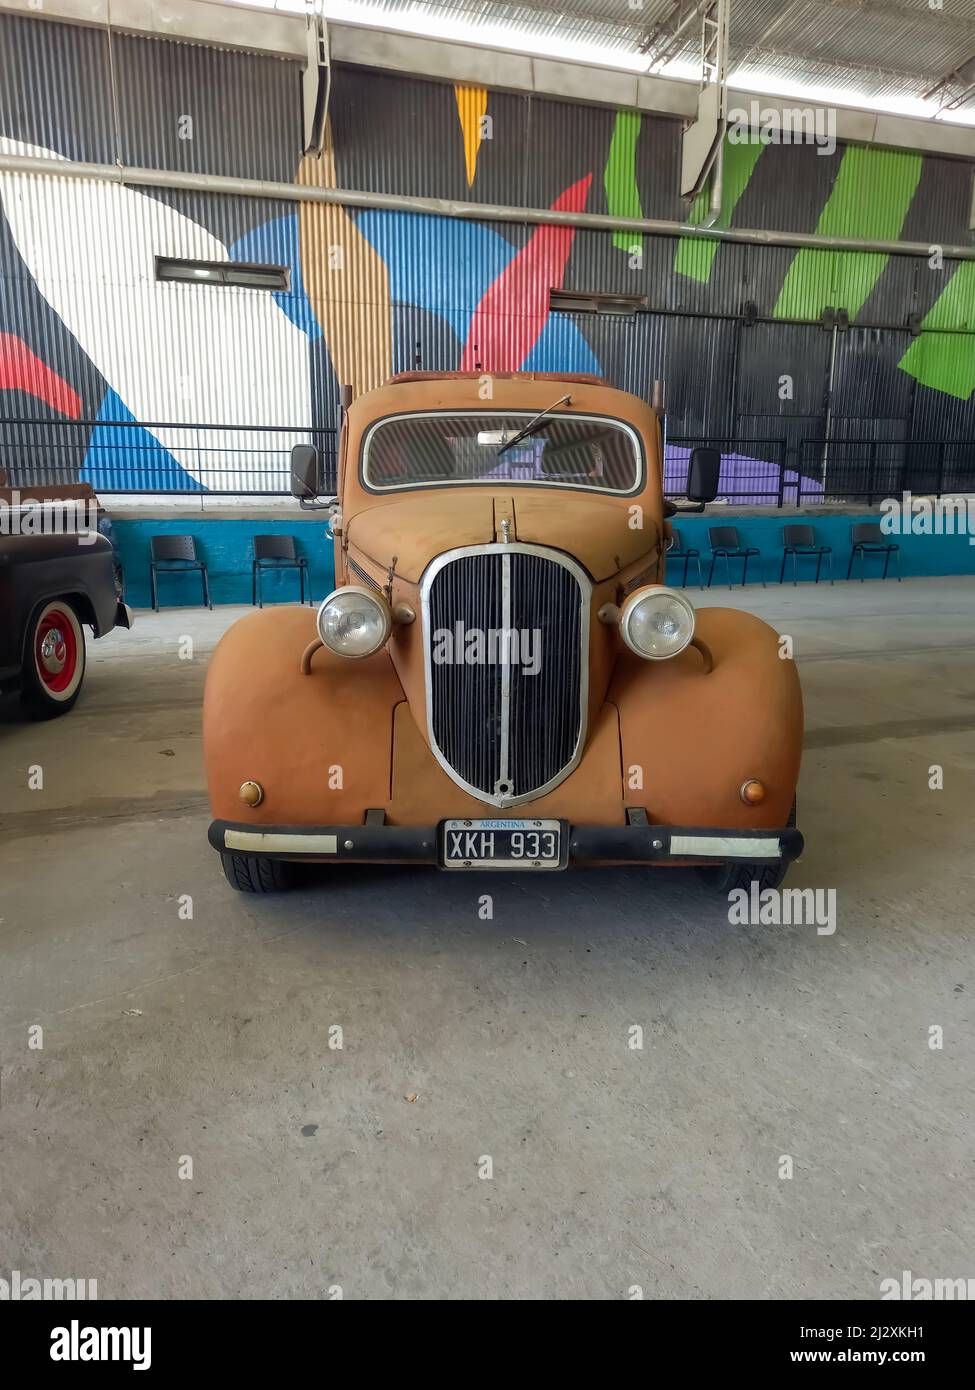 Moron, Argentina - Mar 26, 2022 - old rusty unpainted Chrysler Dodge 1930s parked in a warehouse yard. Front view. Classic car show. Copyspace Stock Photo